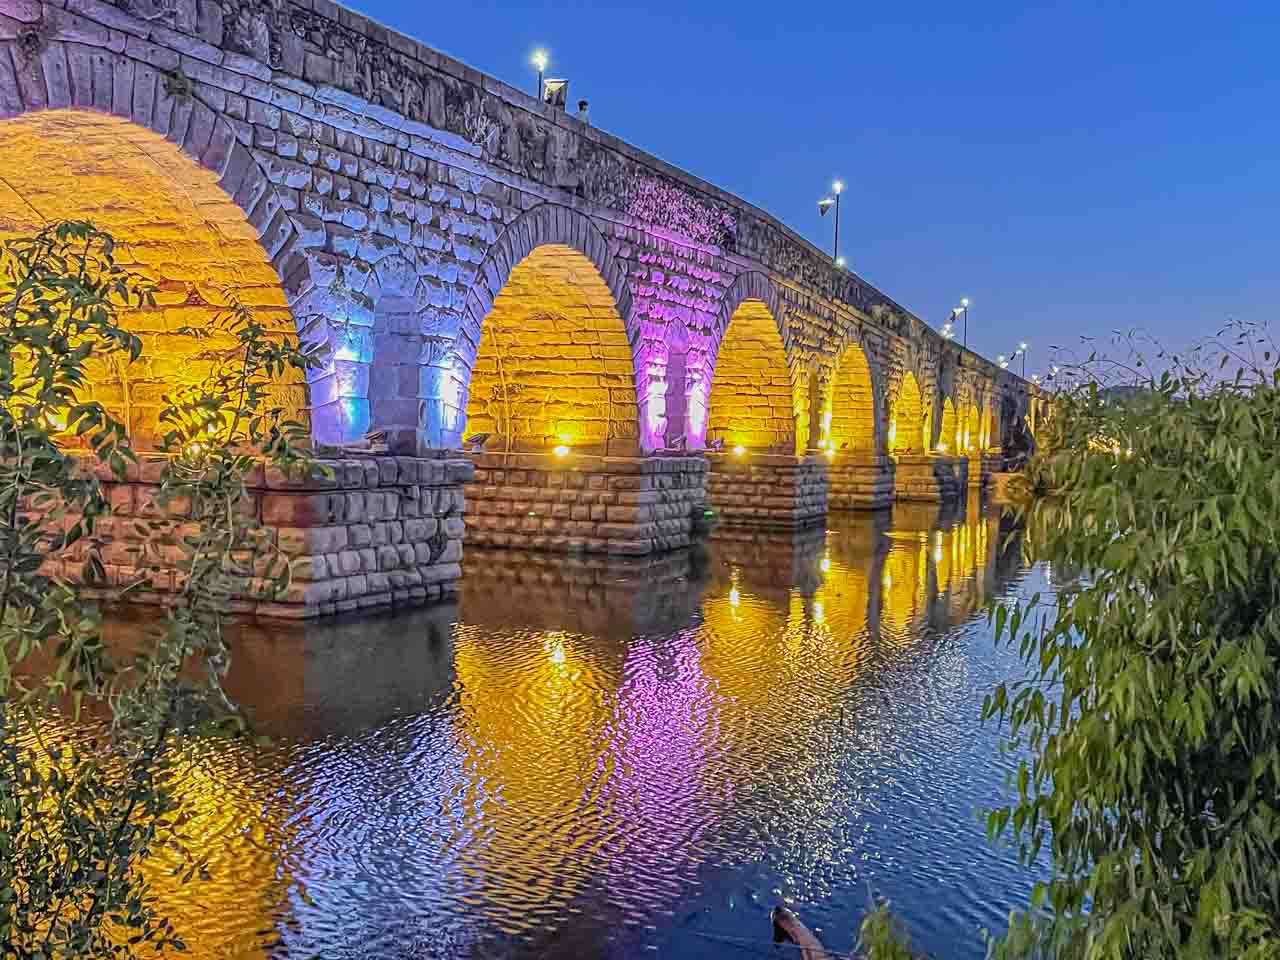 A stone bridge built by the ancient Romans is lit with blue, pink, and yellow lights which are reflected in the river.